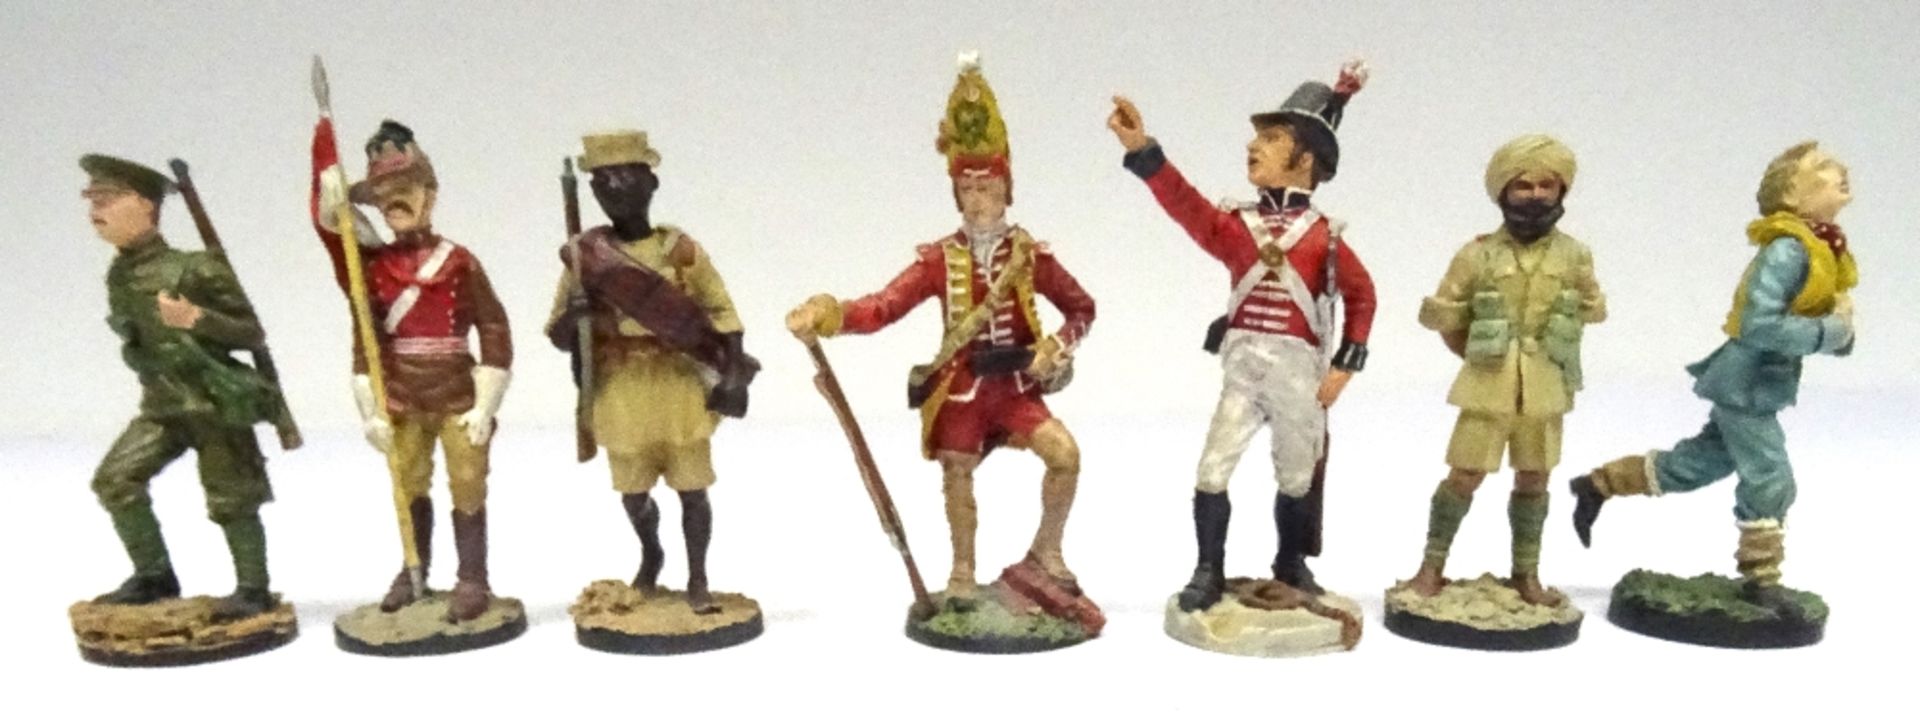 Franklin Mint The Fighting Men of the British Empire - Image 7 of 7